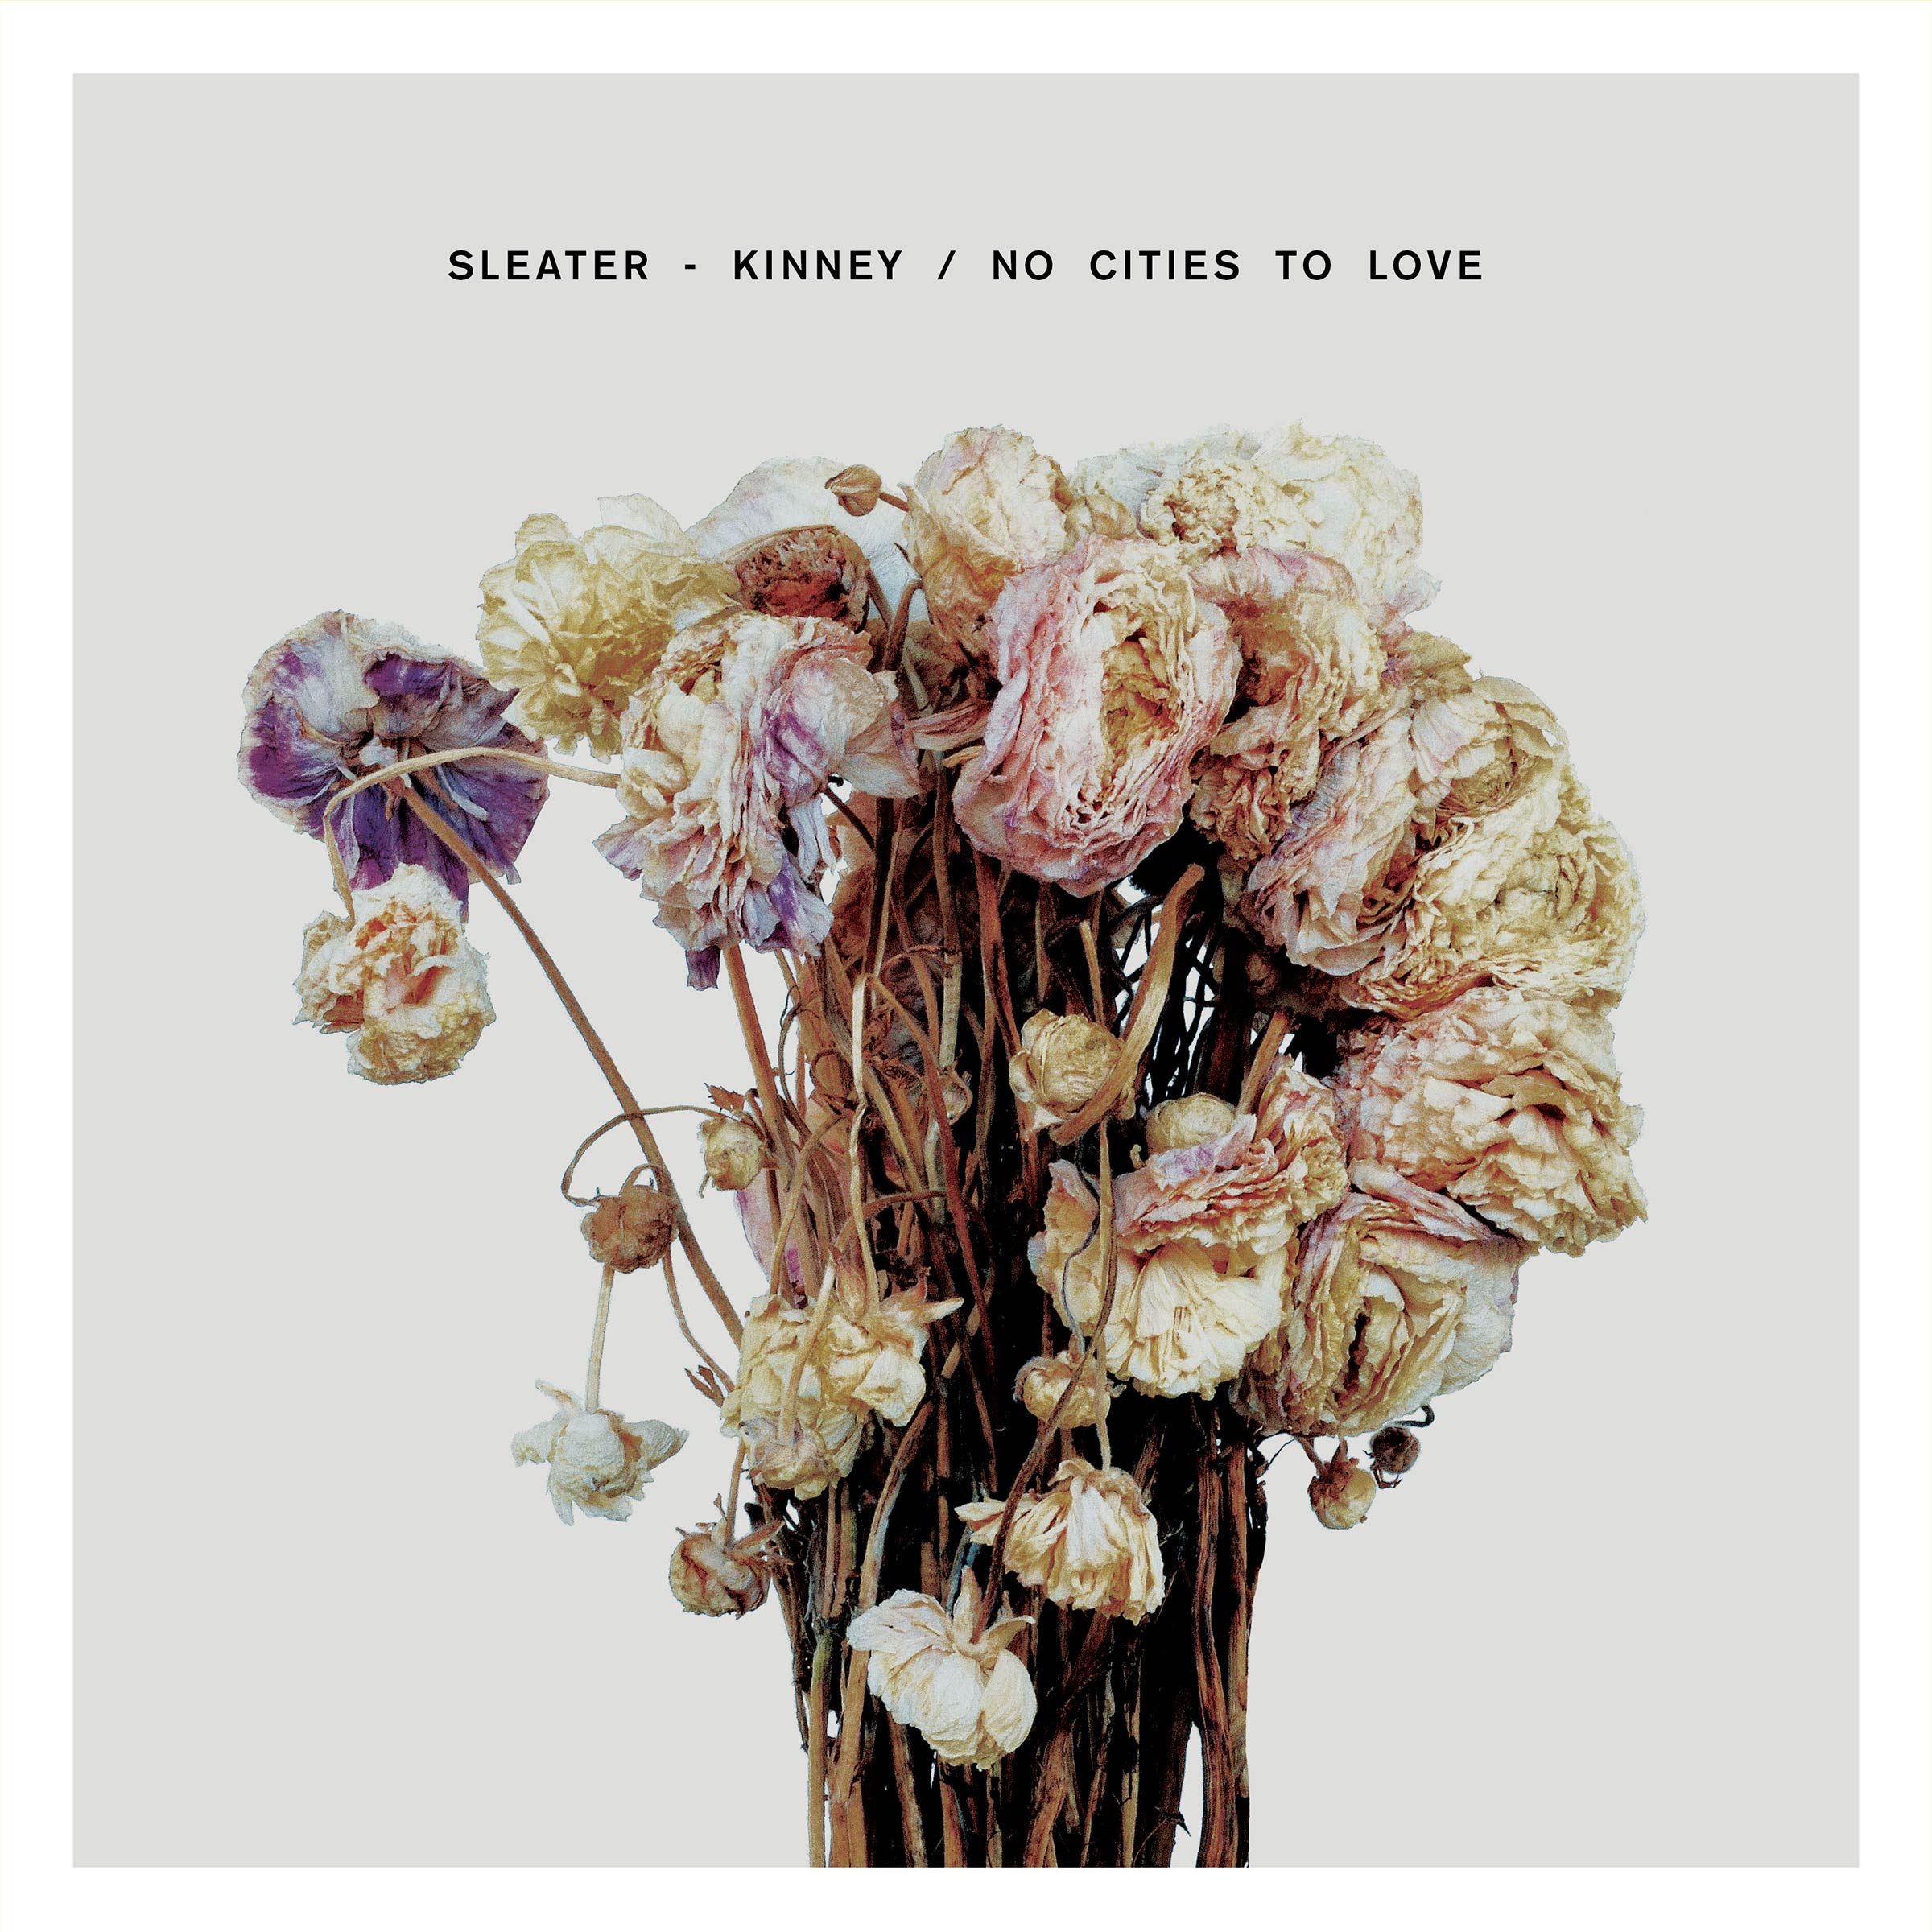 Best of Albums 2015 - Sleater-Kinney, No Cities to Love